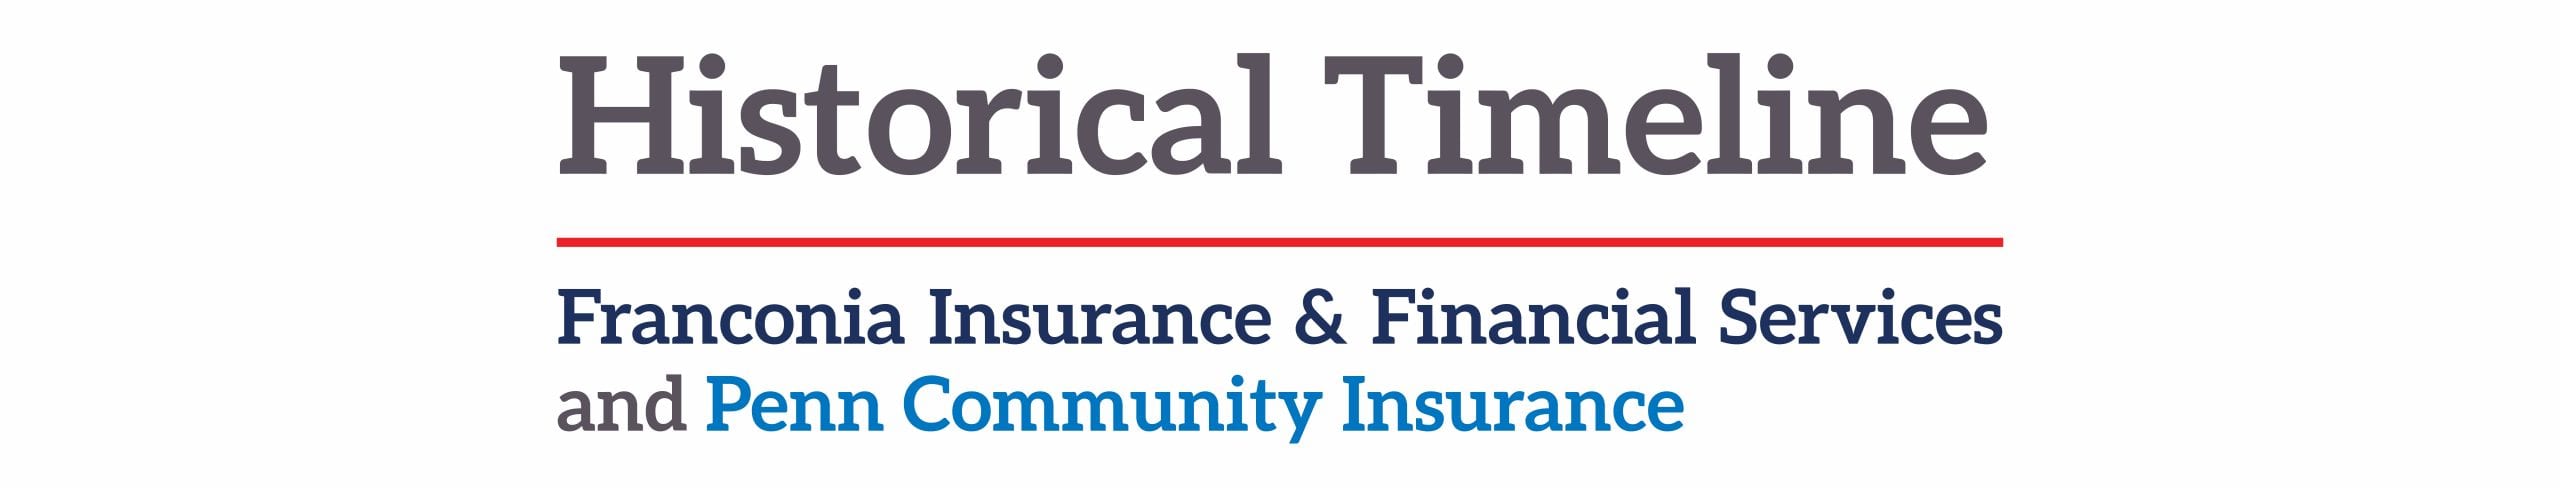 Historical Timeline of Franconia Insurance and Penn Community Insurance